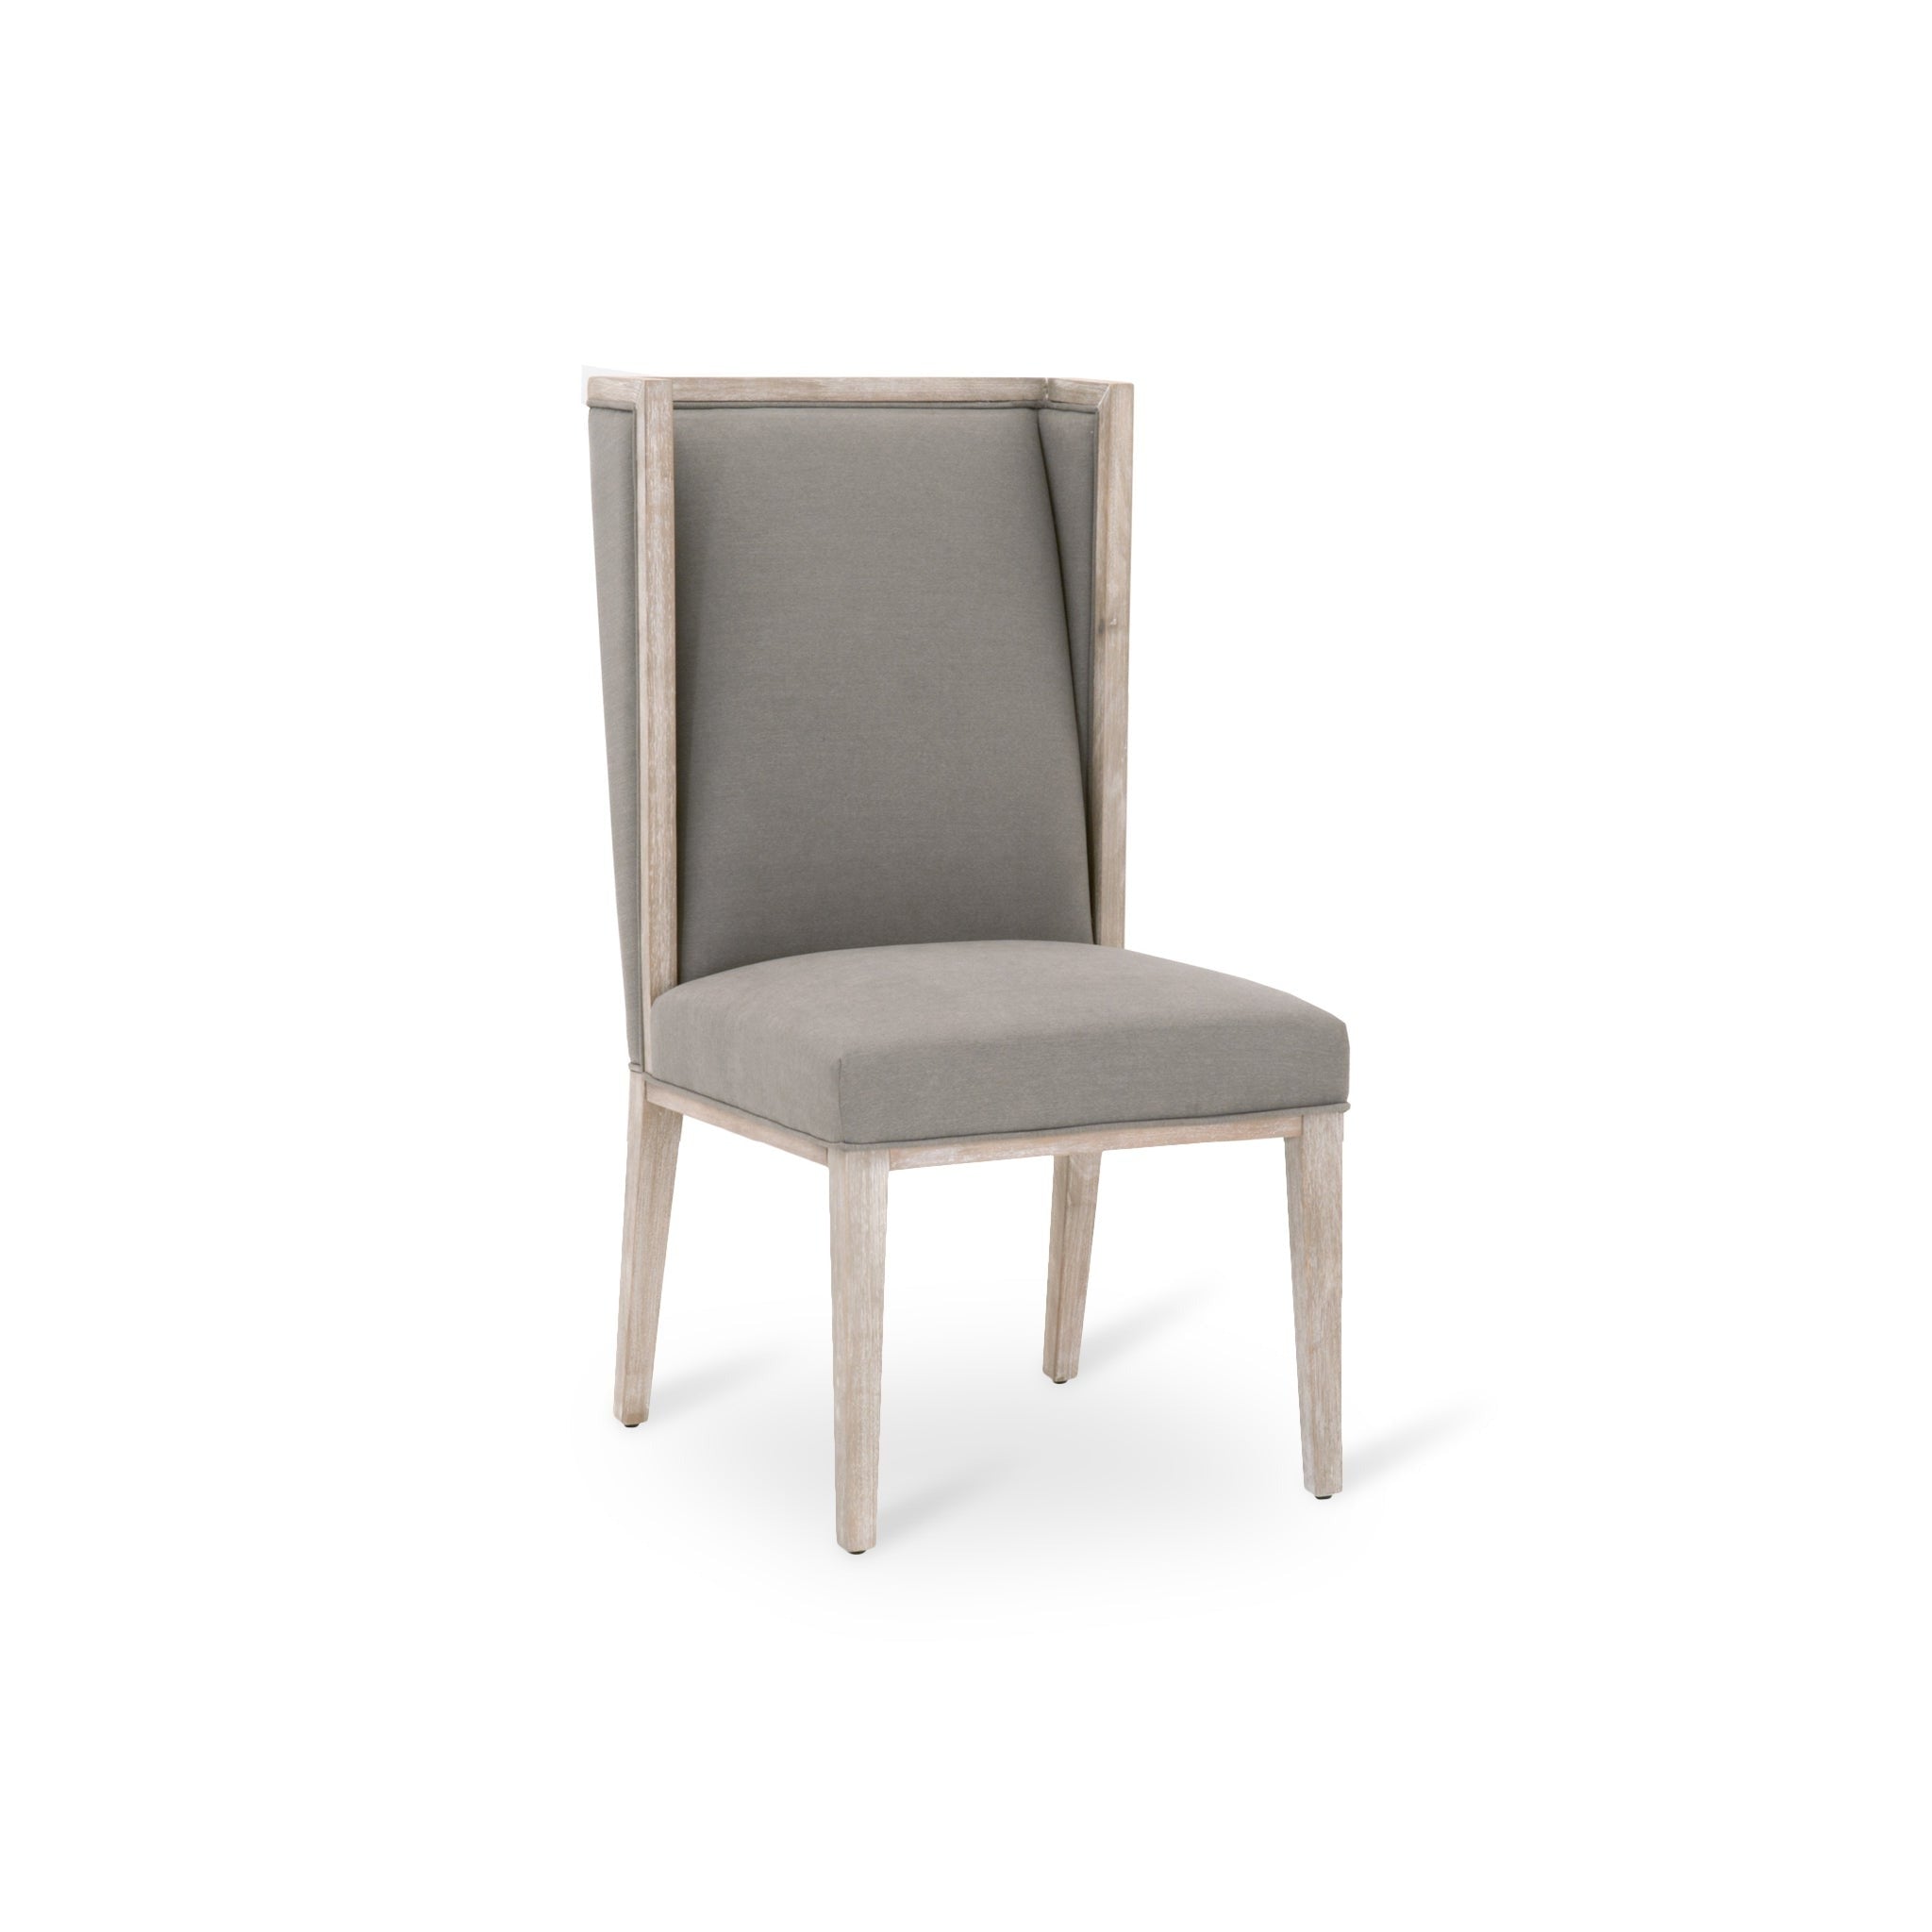 Ebikon Wing Chair - Set of 2